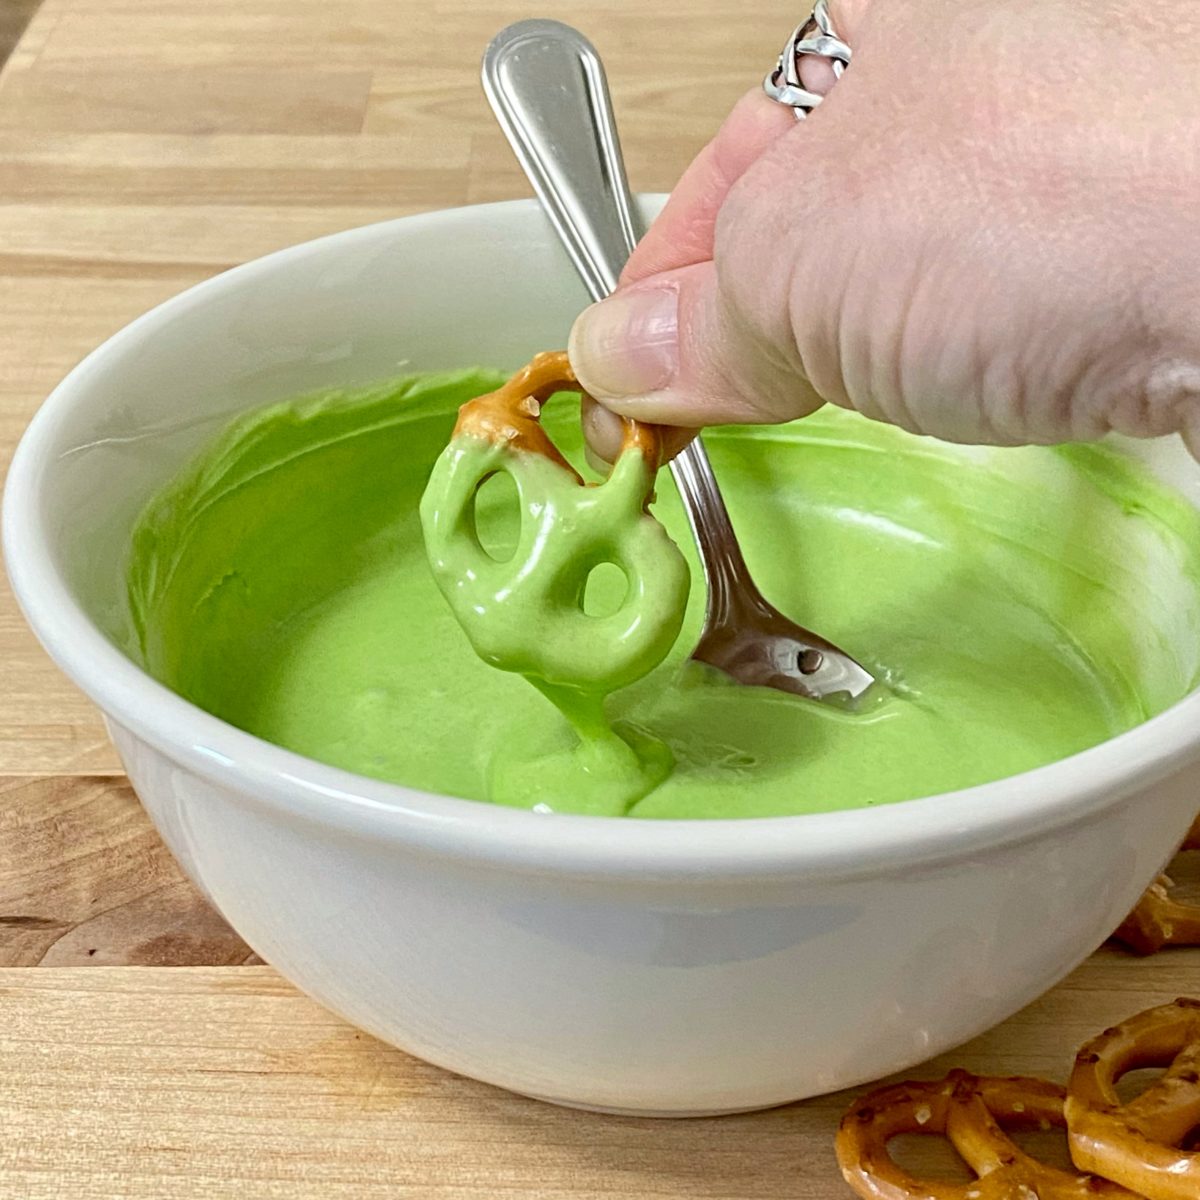 Pretzel twist being dipped in green melted chocolate.